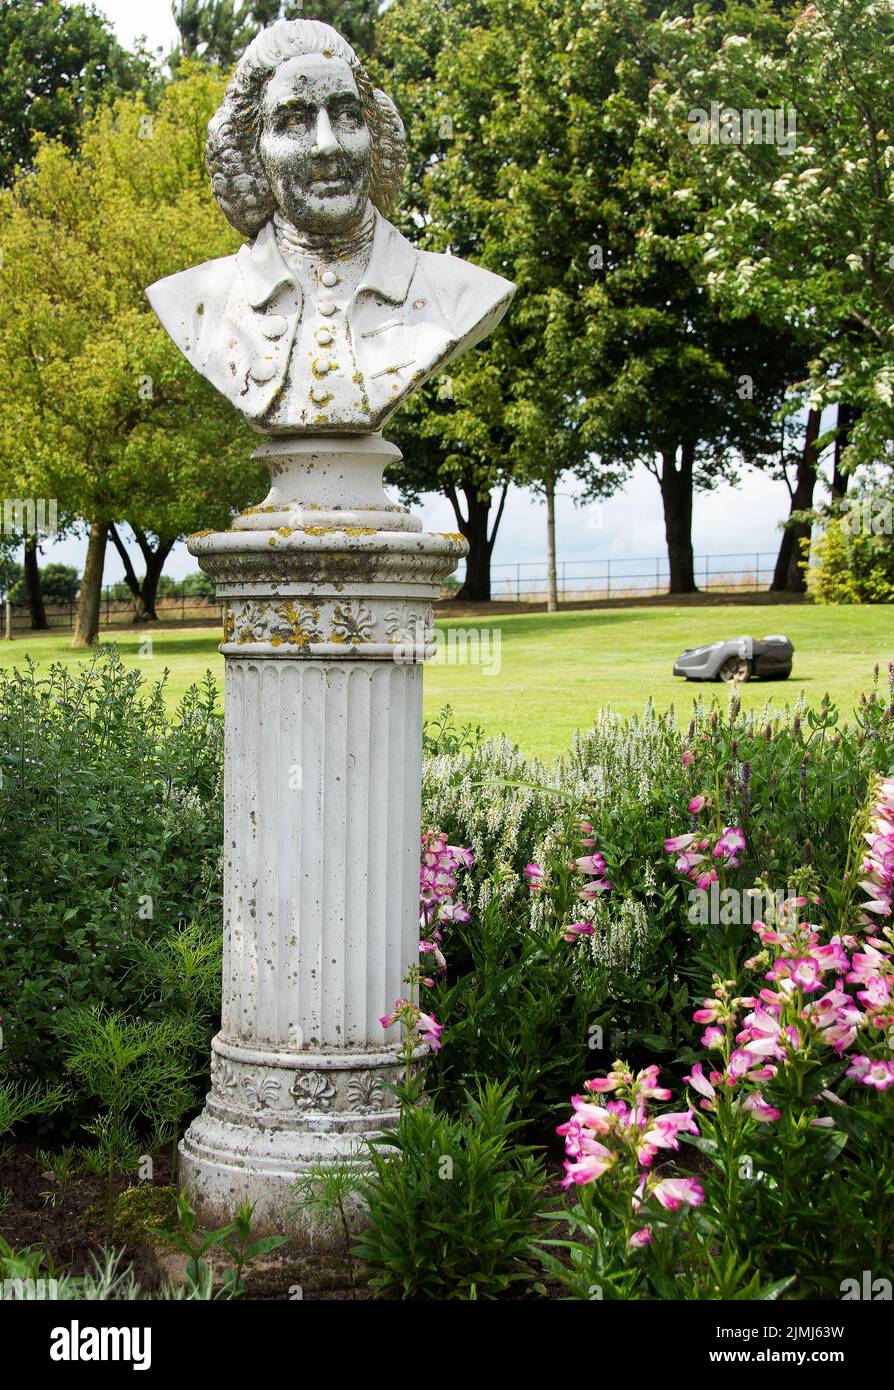 Capability Brown Bust and a robot mower at Brightwater Gardens Stock Photo